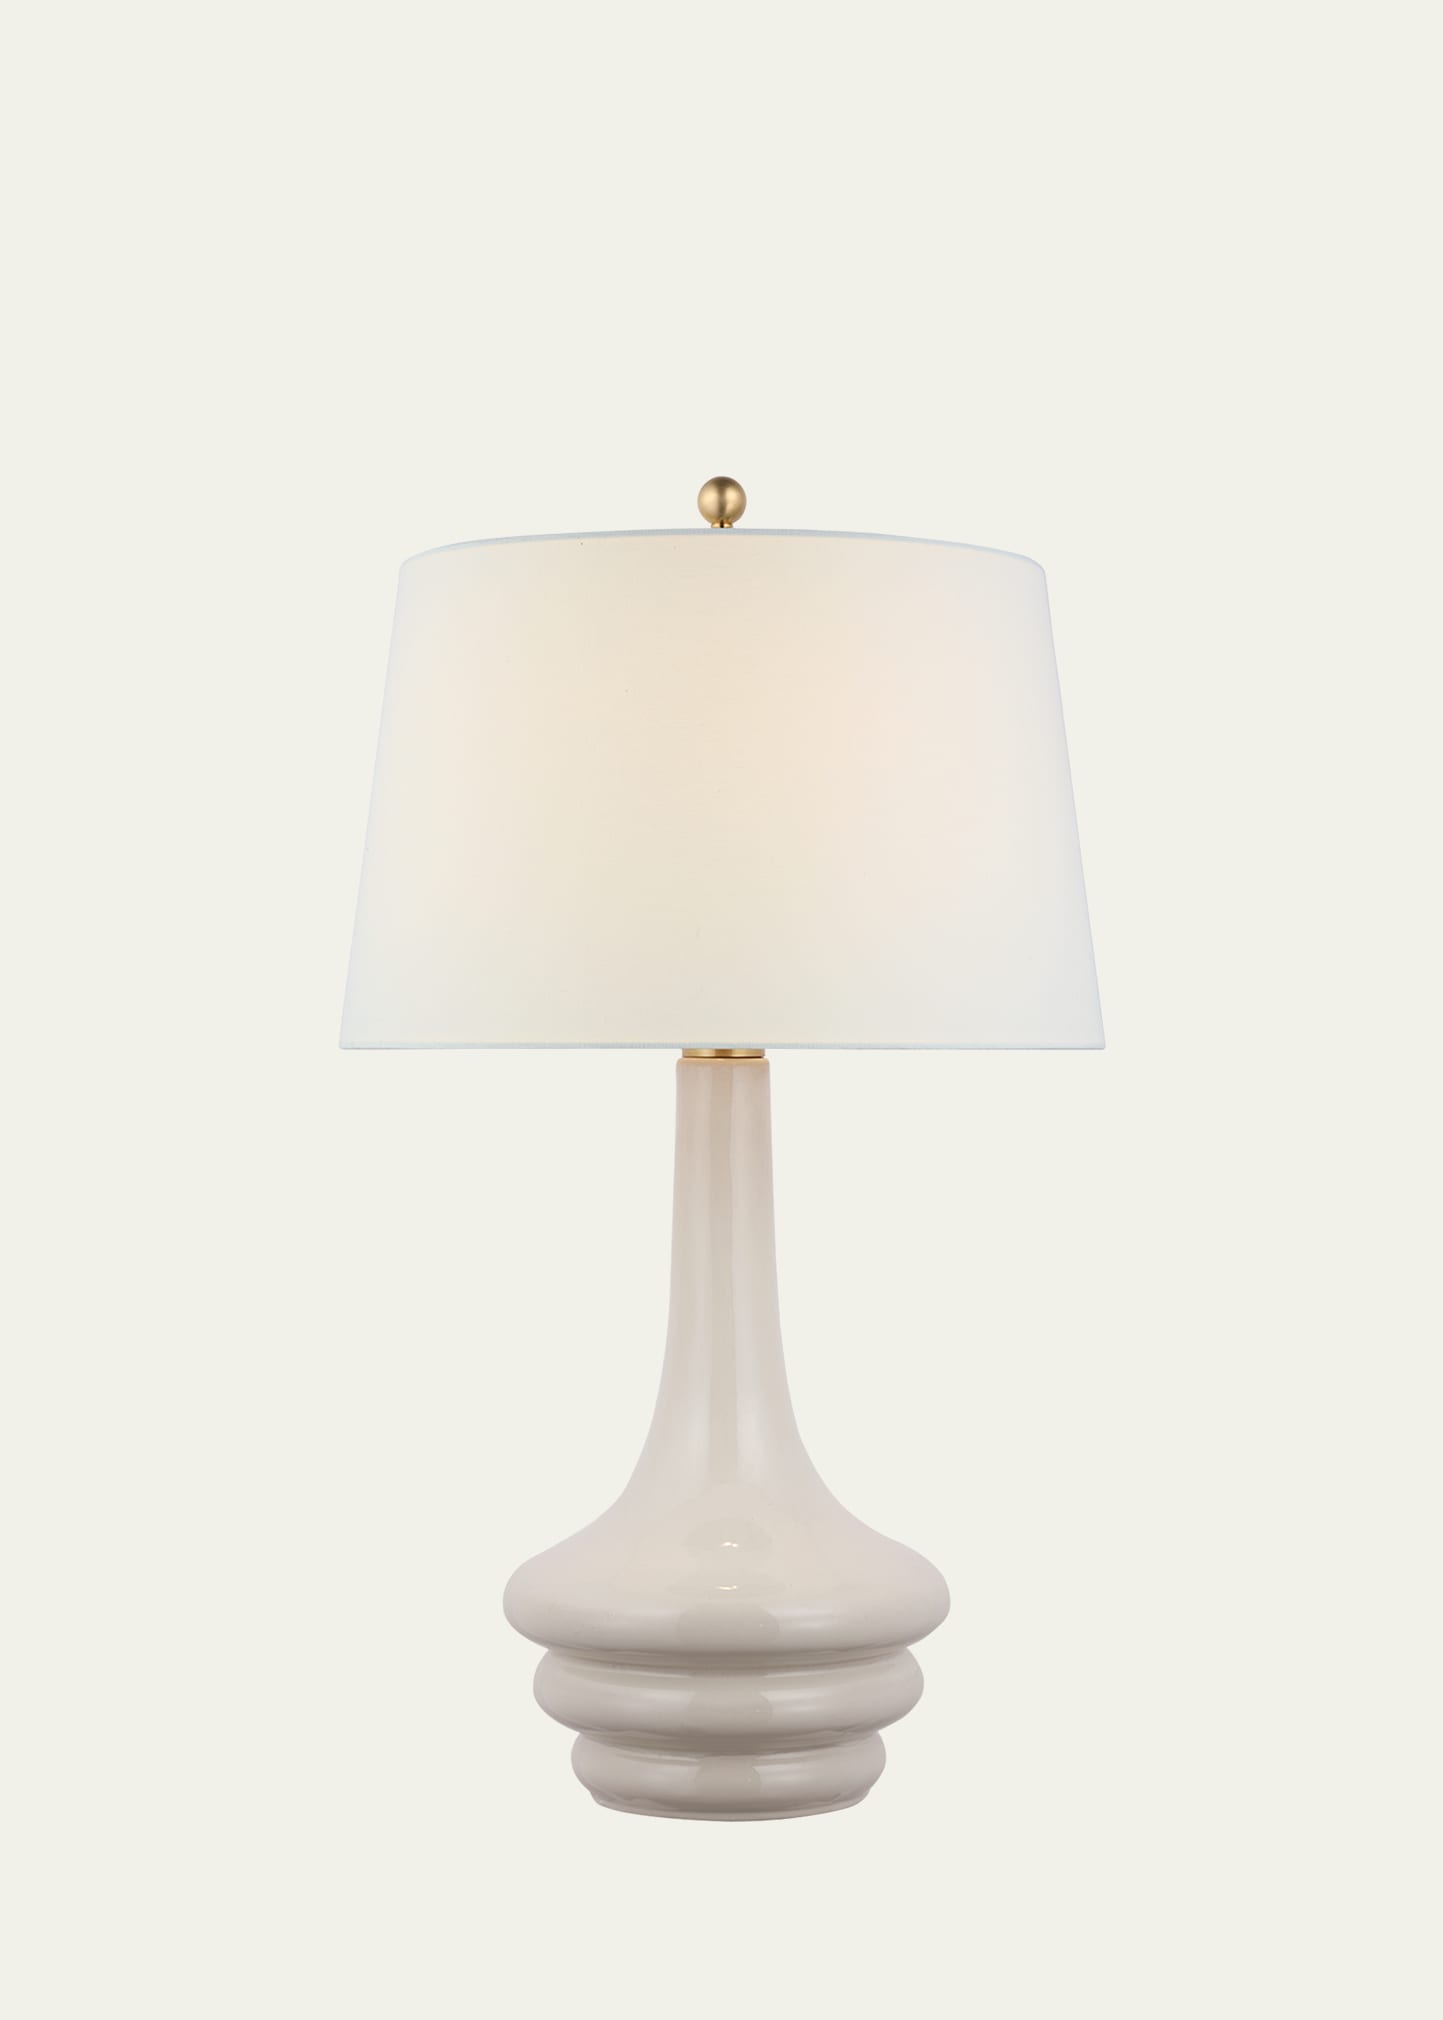 Chapman & Myers For Visual Comfort Signature Wallis Large Table Lamp By Chapman & Myers In Ivory